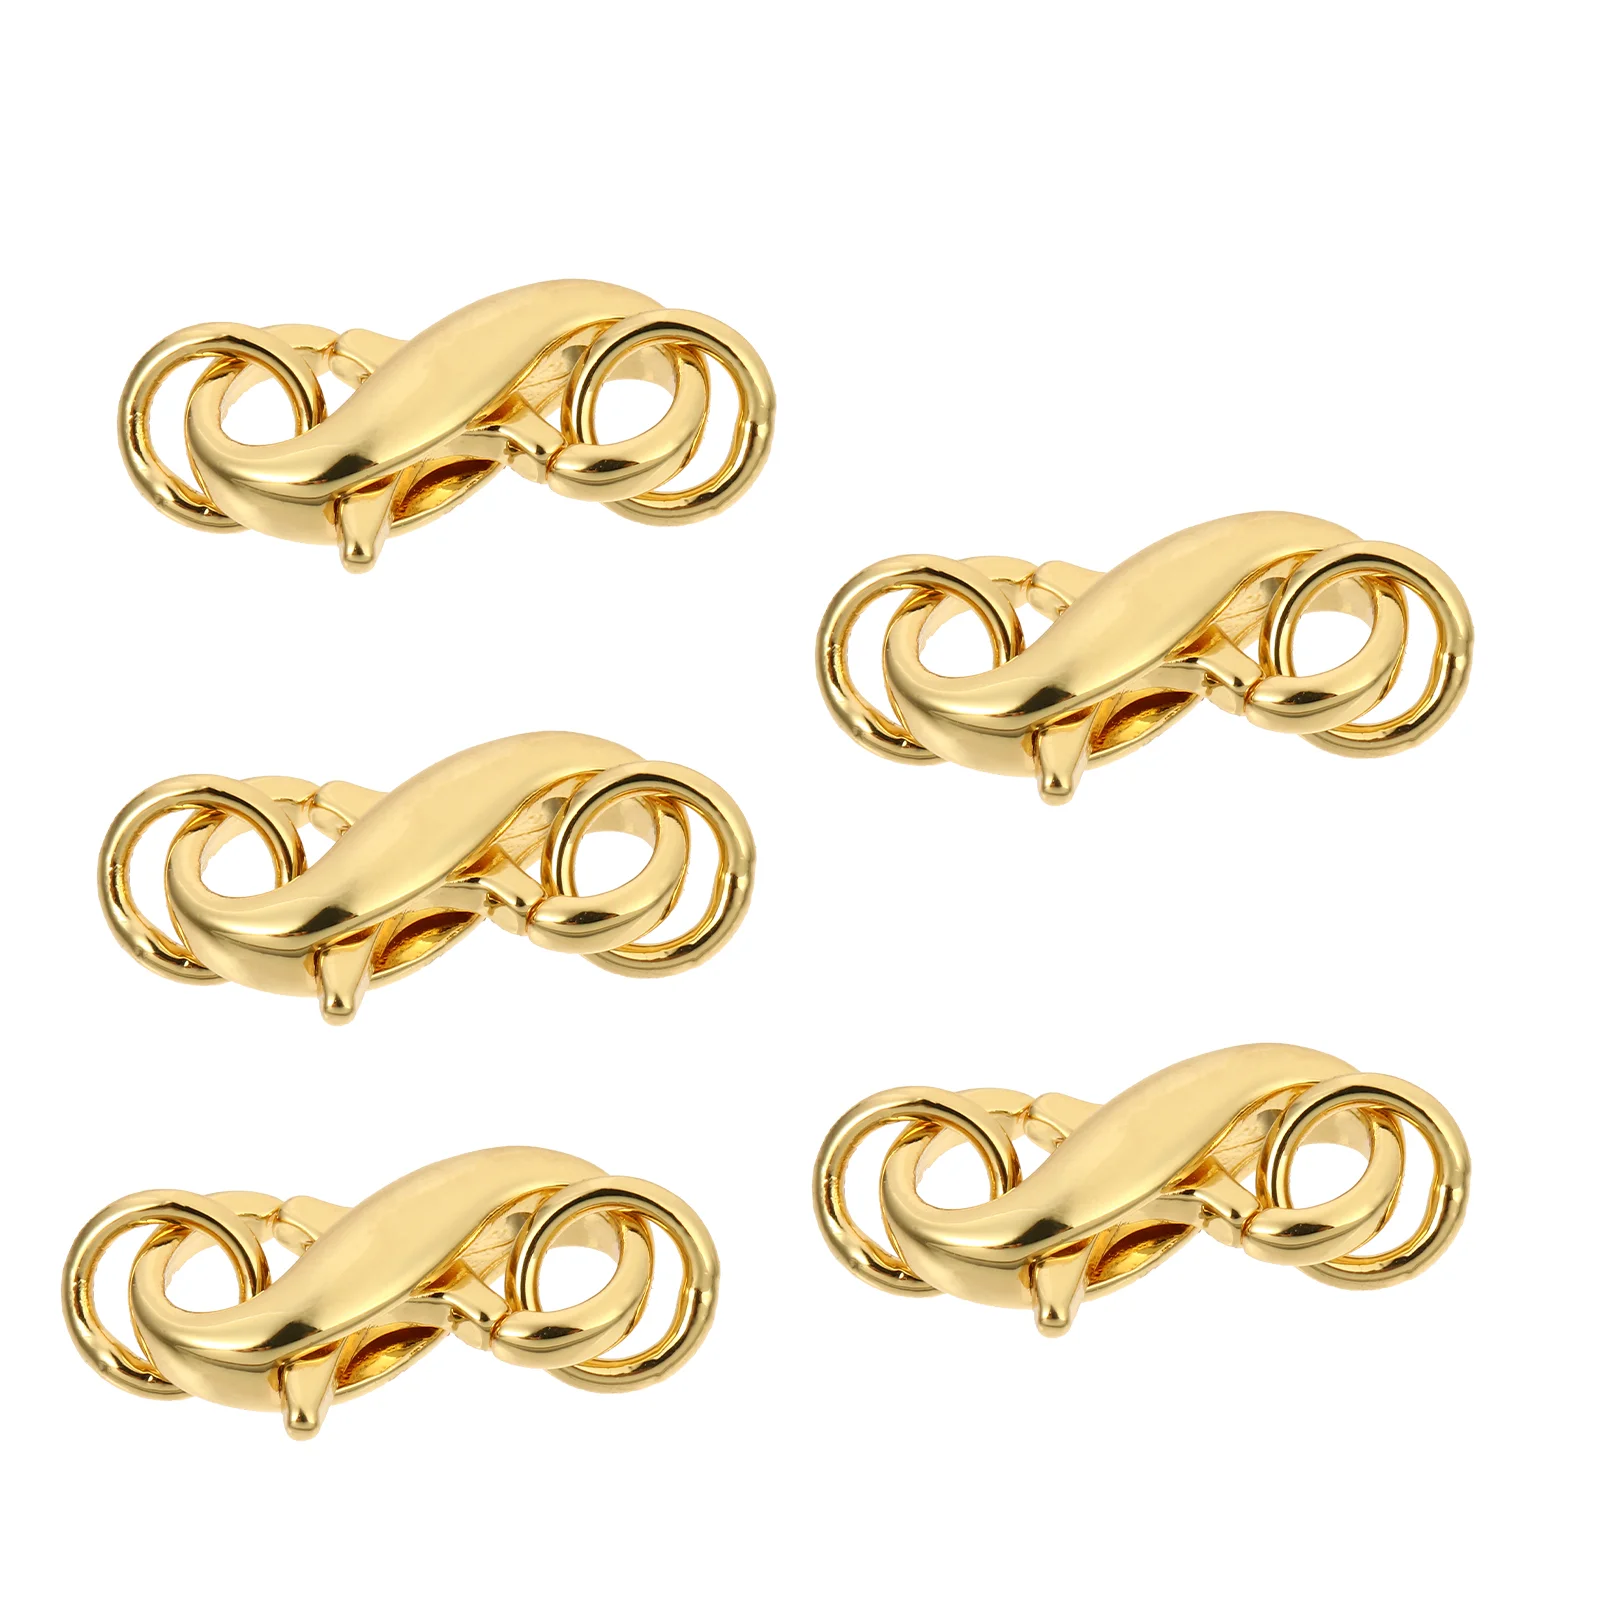 

5 Pcs Snap Hooks Double-Headed Lobster Buckle Connecting Clasp Supply Fastener Parts Metal Bracelets